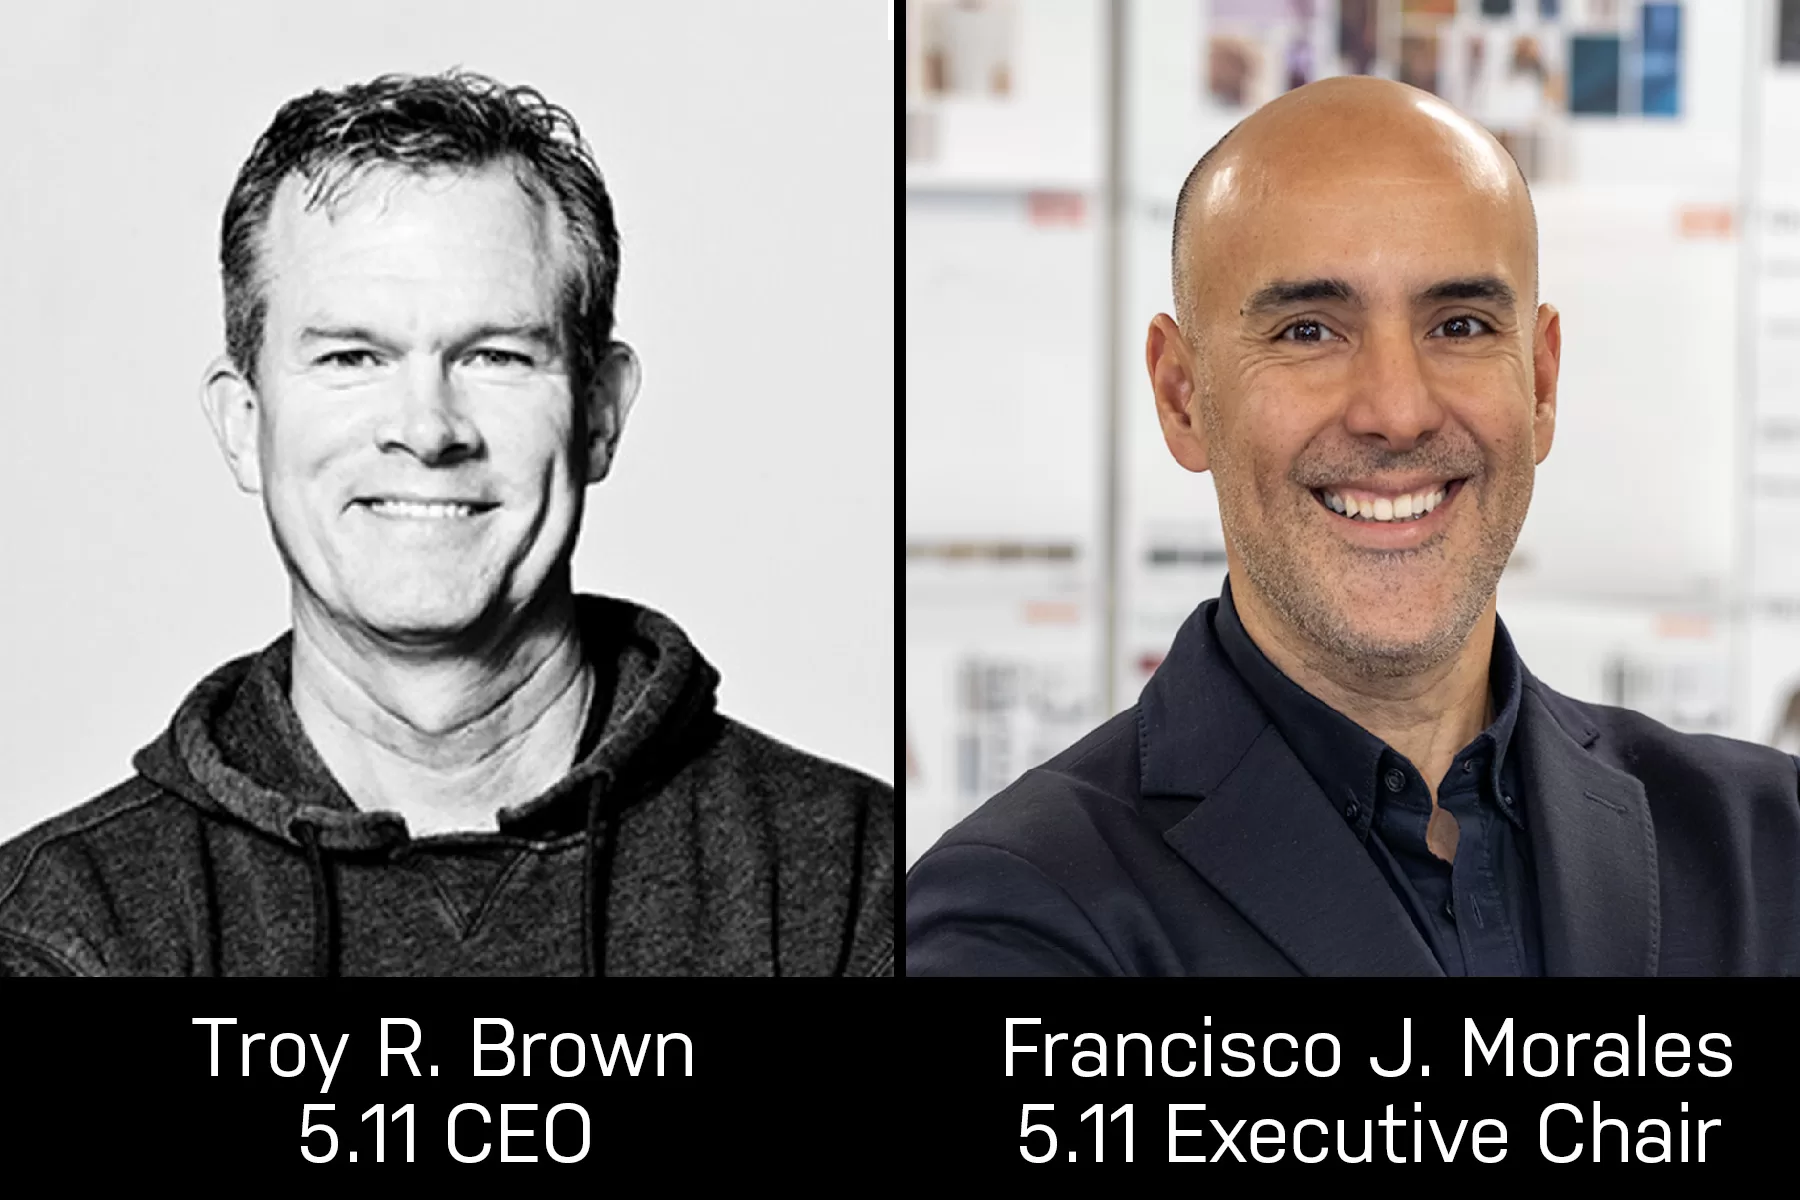 5.11 Tactical Announces Francisco J. Morales as Executive Chair, Troy R. Brown as CEO